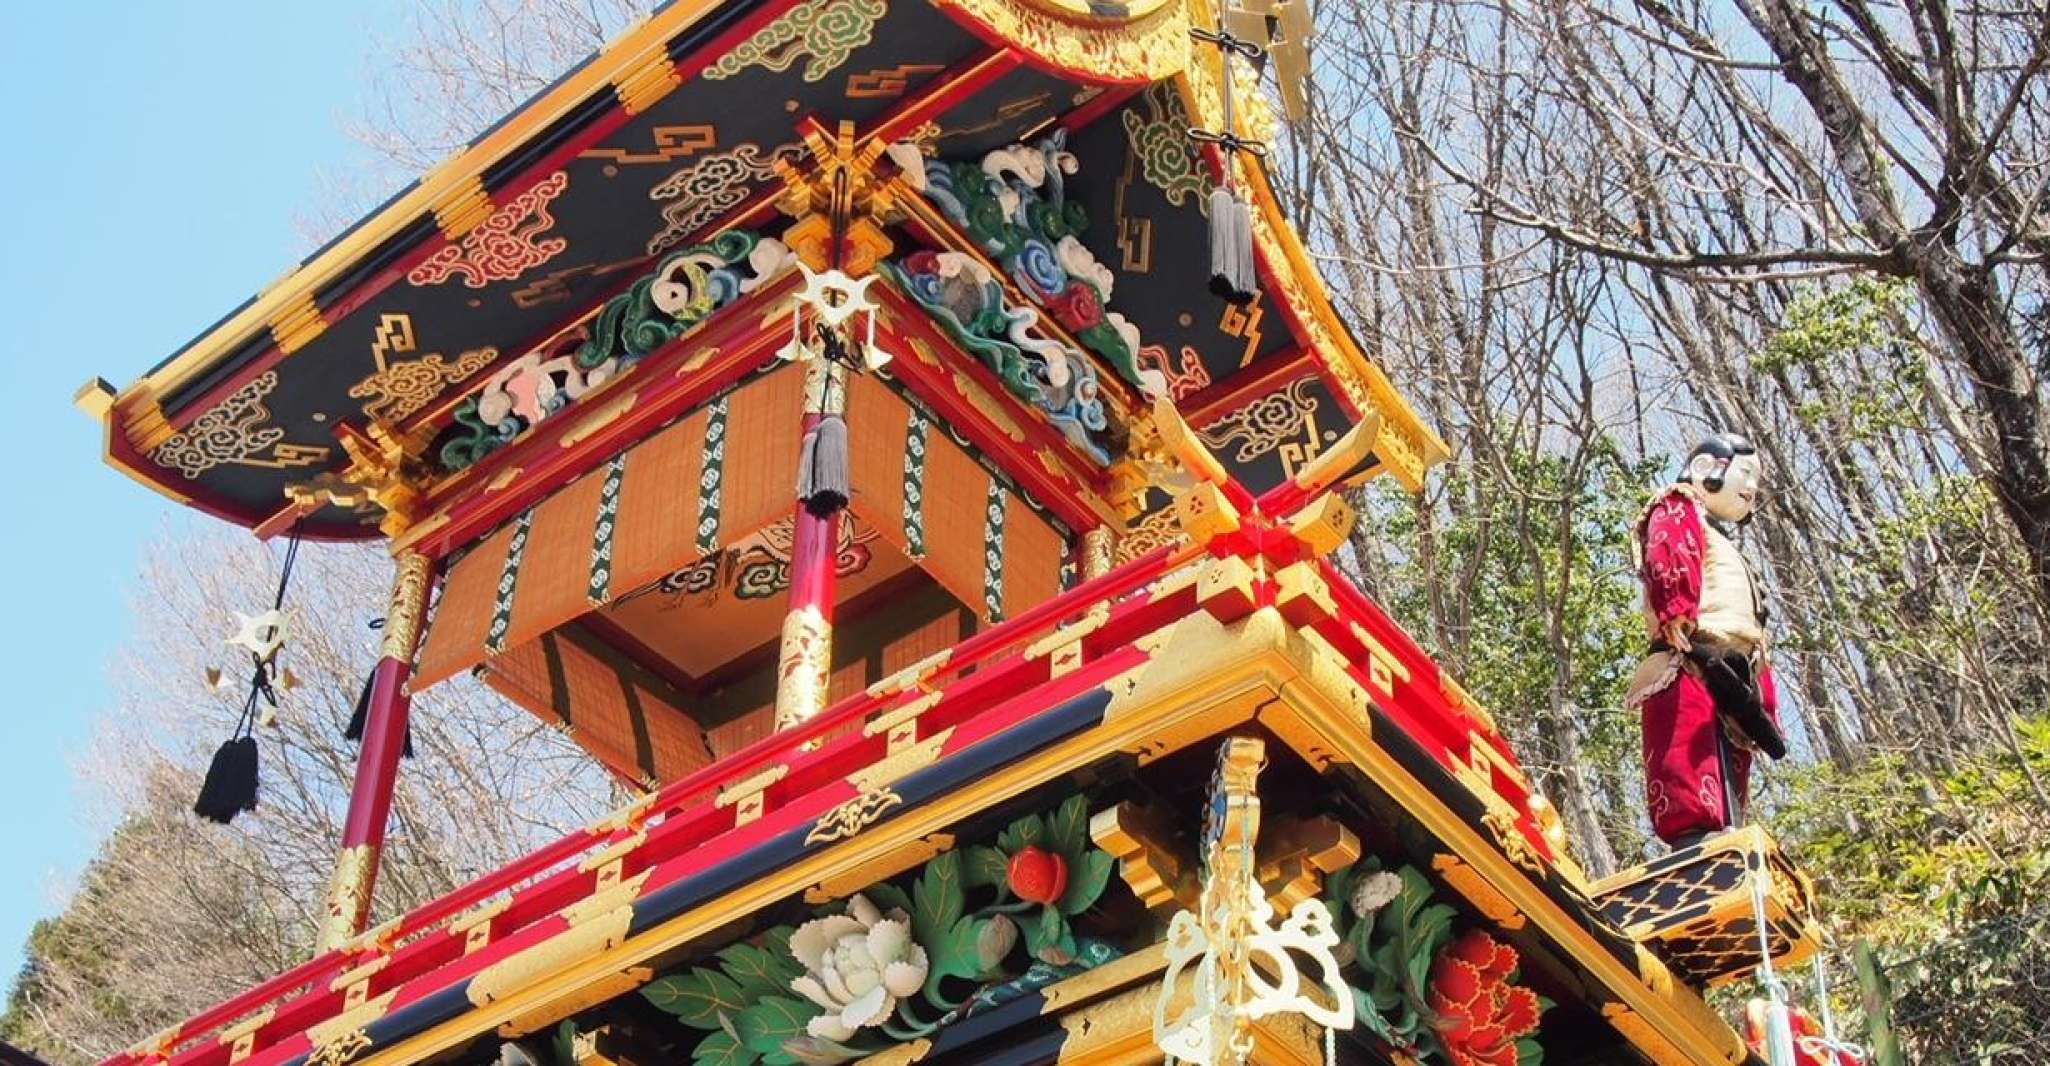 From Takayama, Immerse in Takayama's Rich History and Temple - Housity